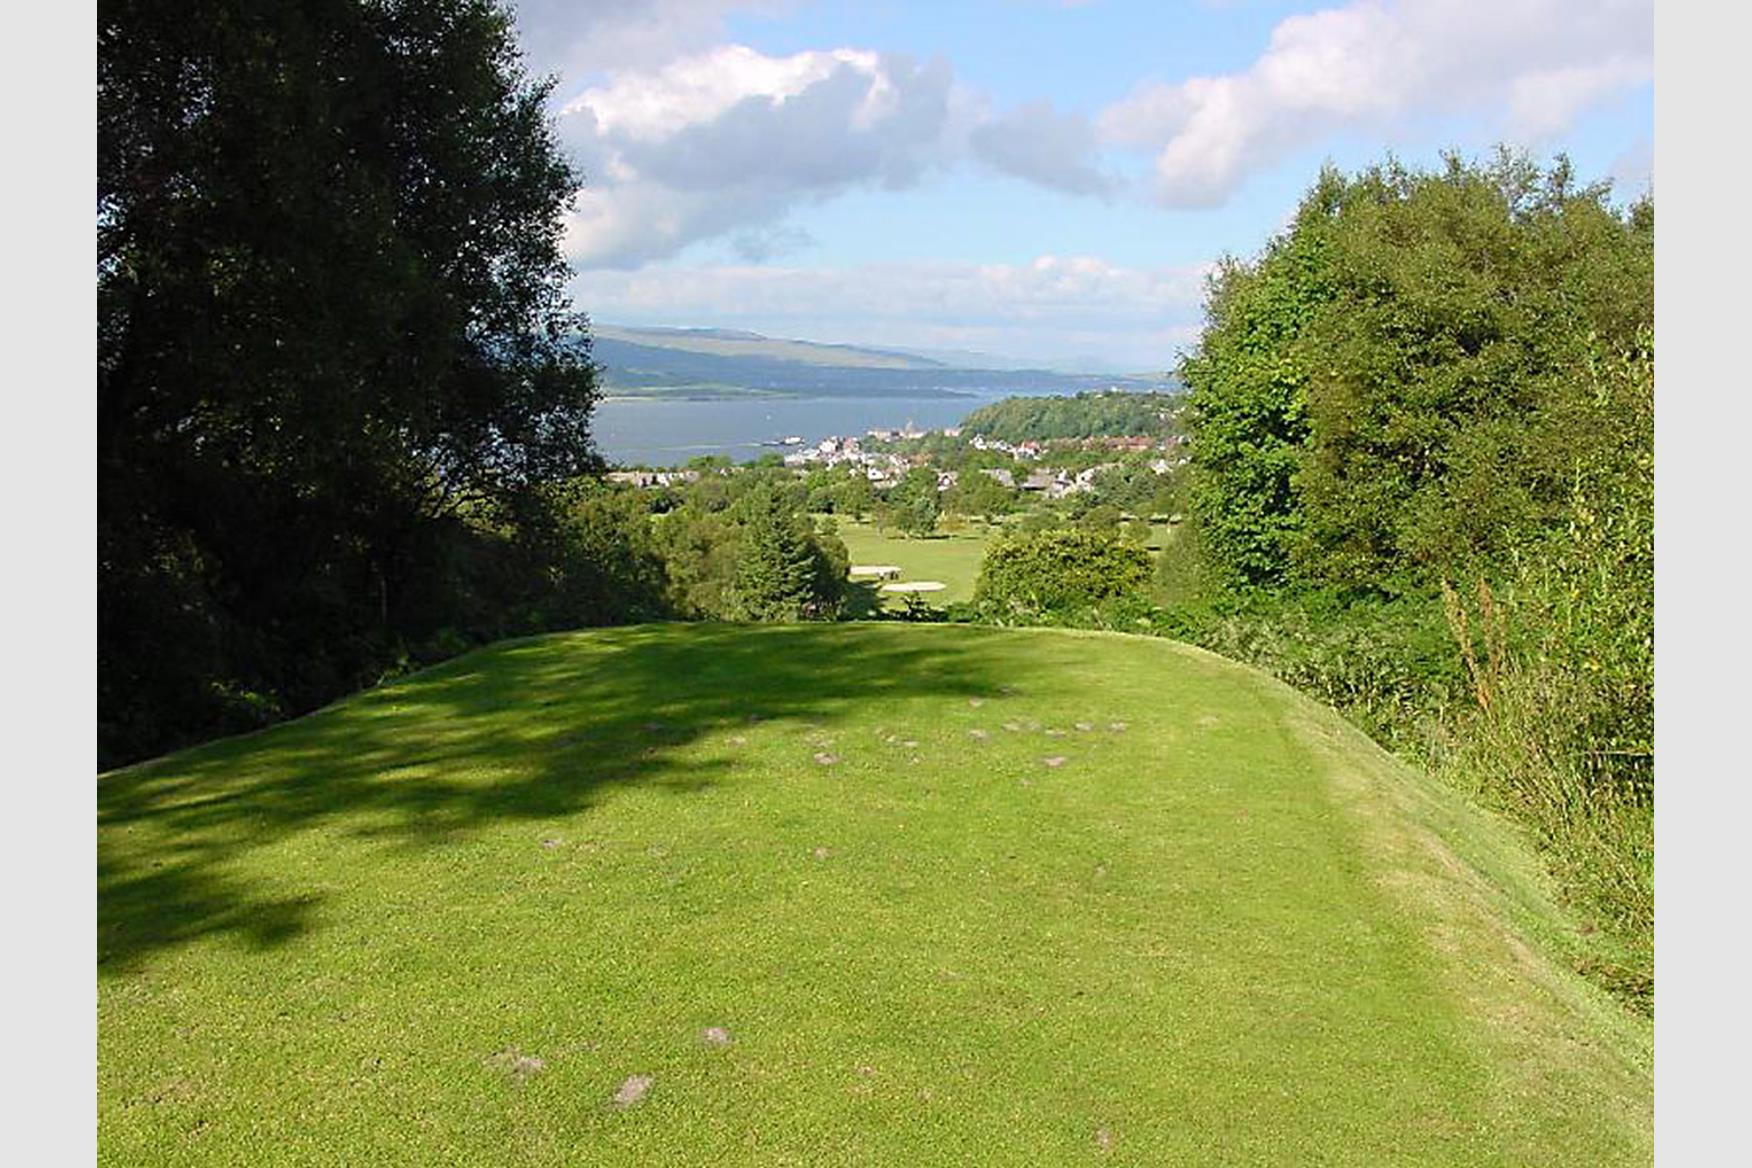 Image result for gourock golf course great pic